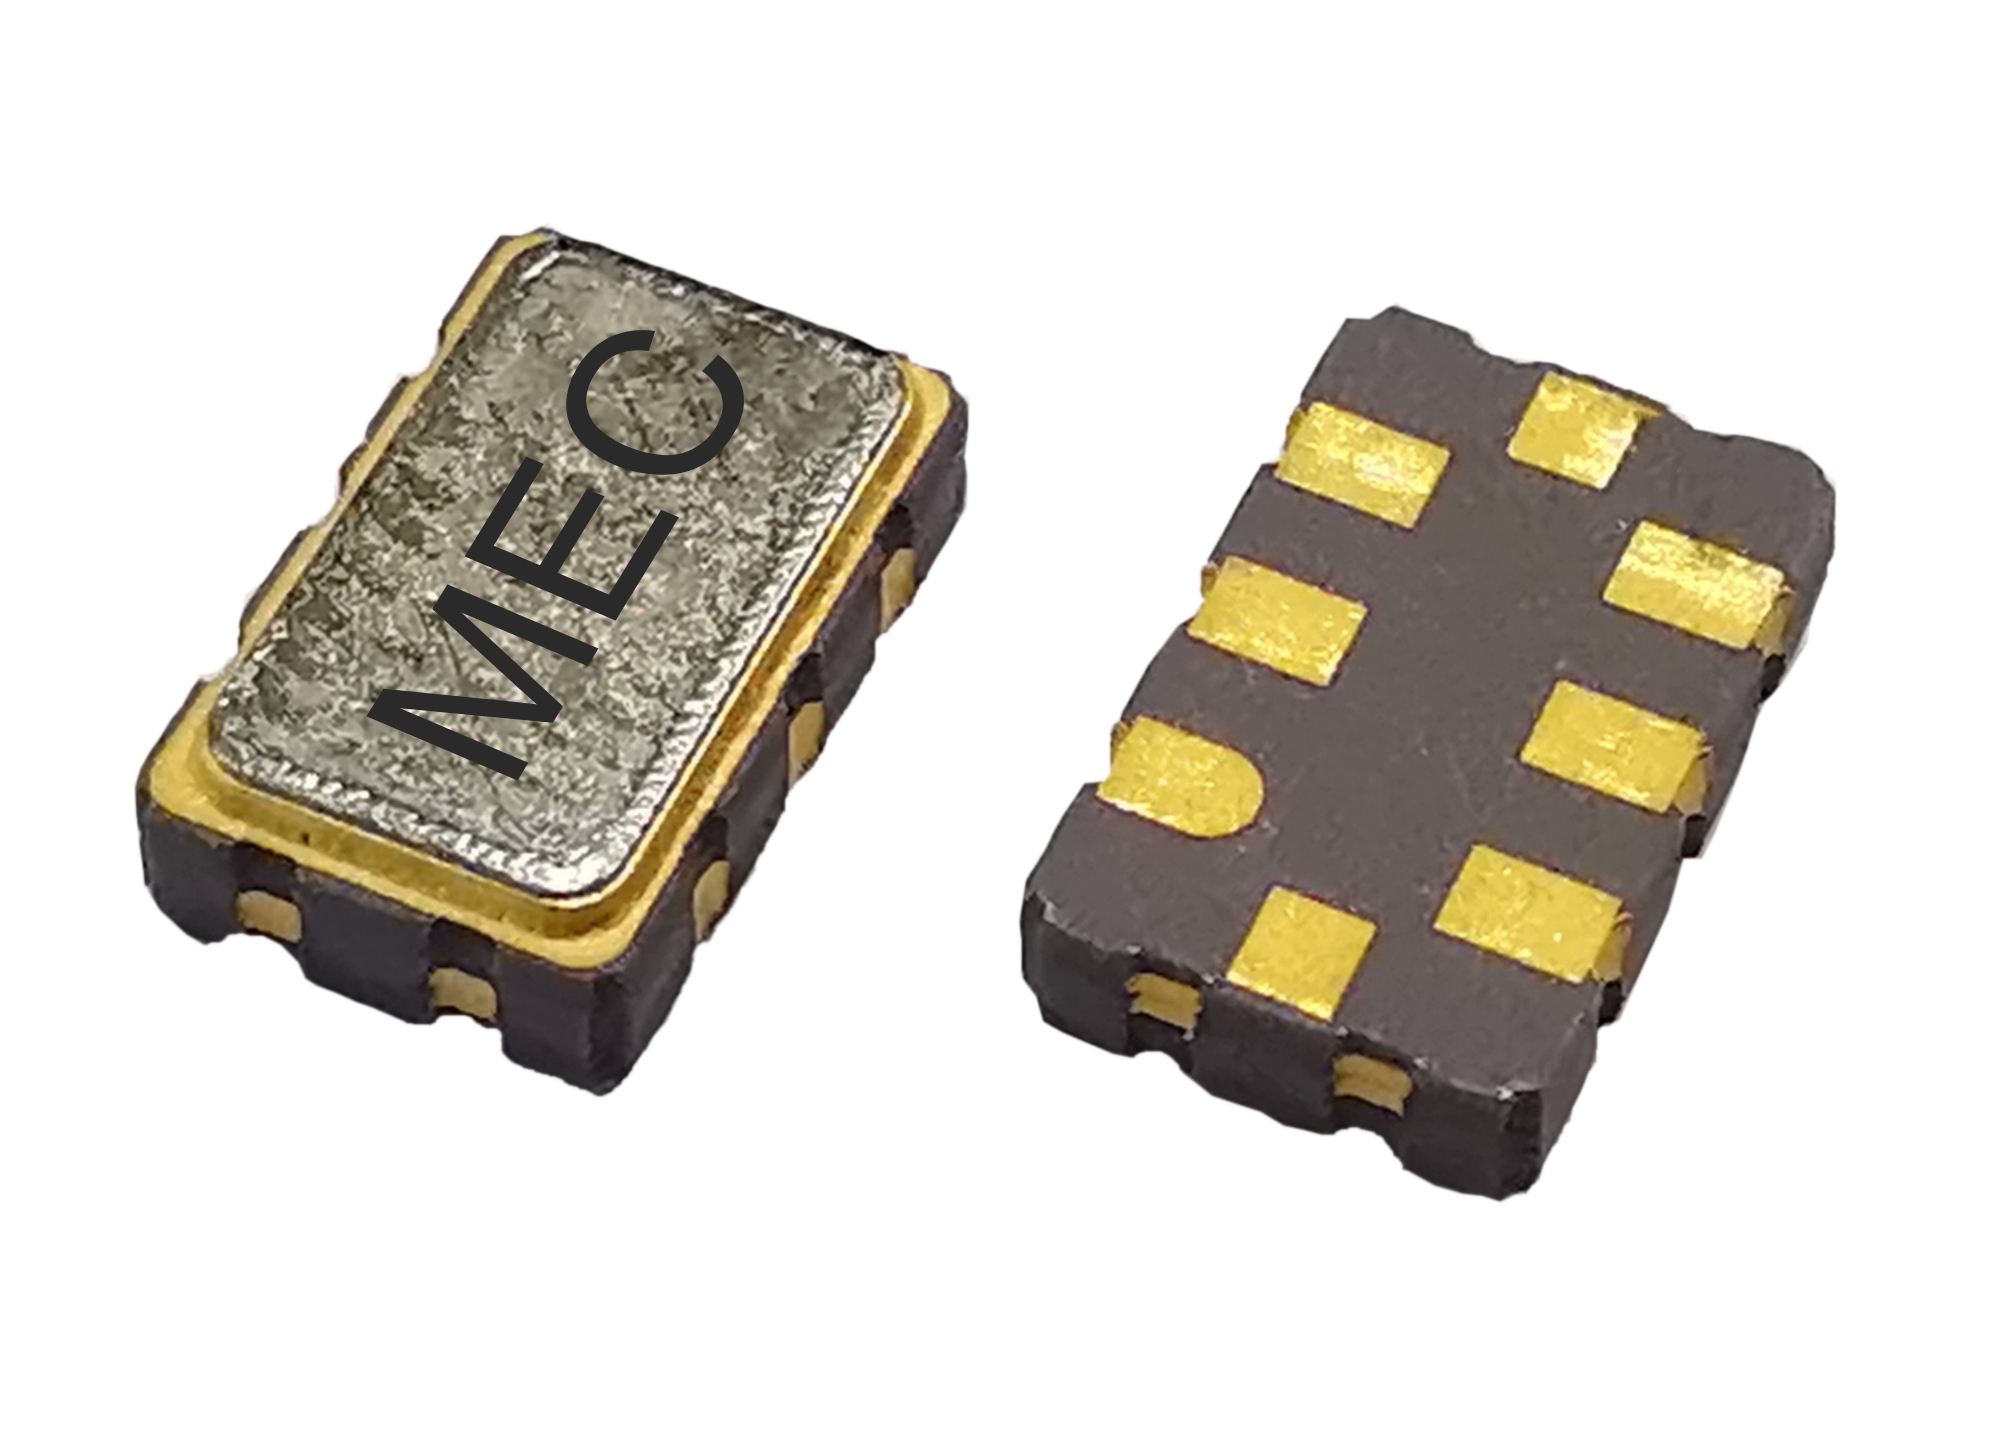 GCJF538 5032 2.5V Ultra Low Jitter Quick-turn Programmable Differential HCSL SMD Voltage Controlled Crystal Oscillator